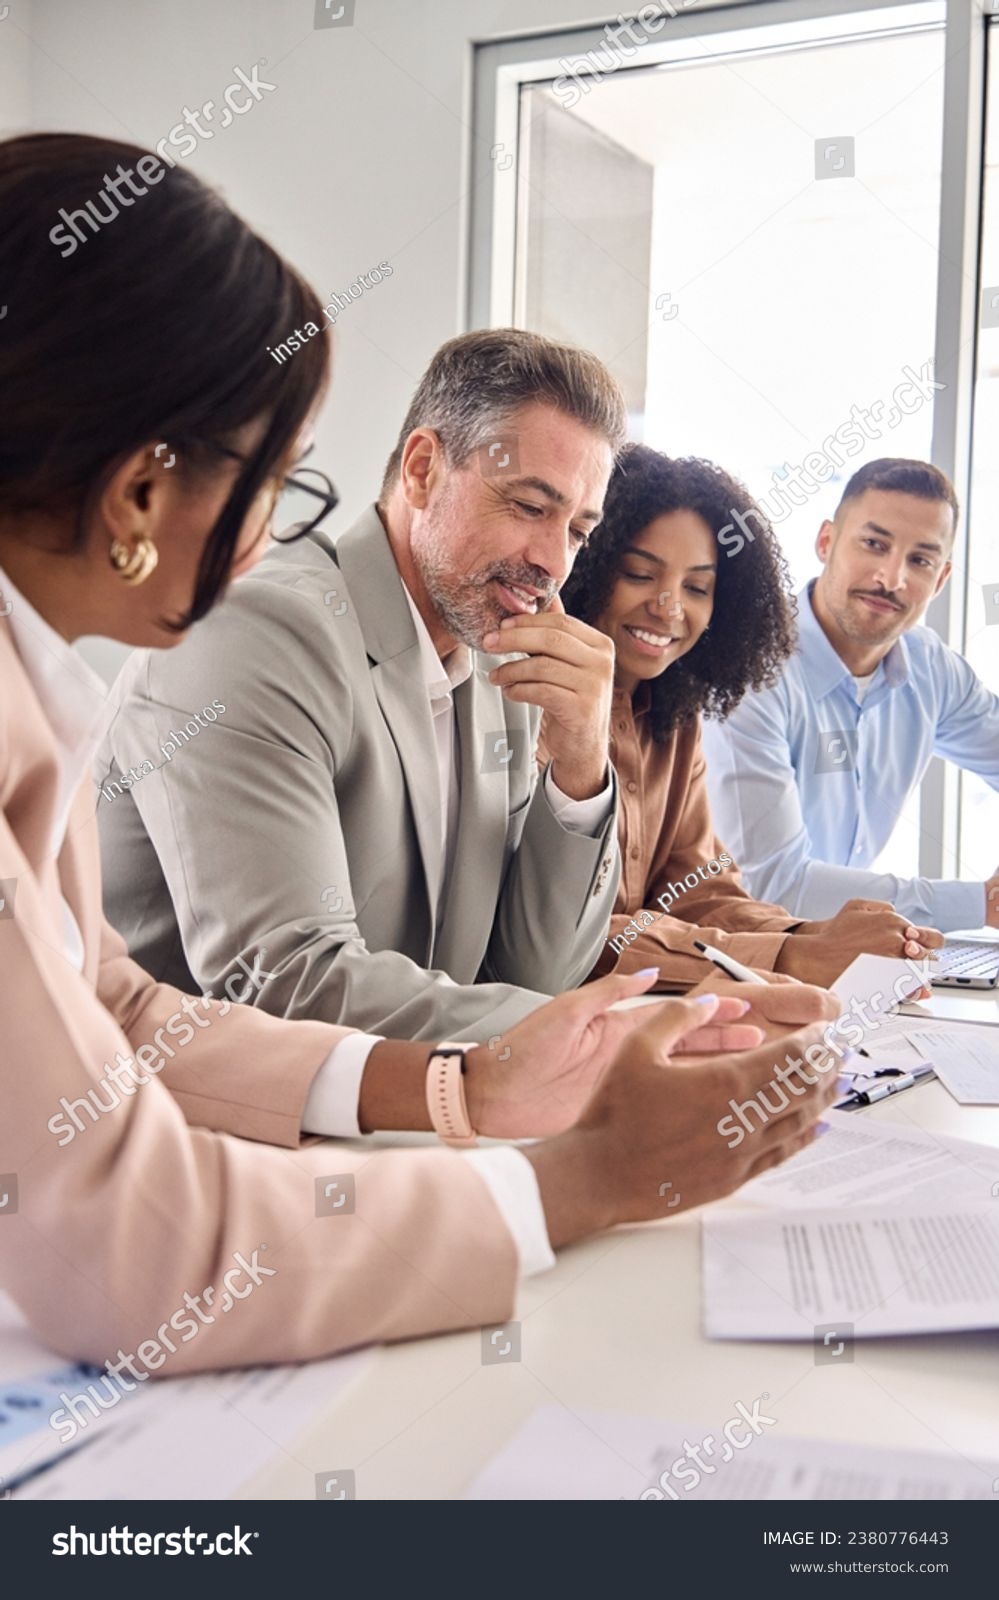 Busy diverse professional business team having discussion at office meeting. Financial advisors or managers consulting senior business man investor talking sitting at conference table. Vertical shot. #2380776443